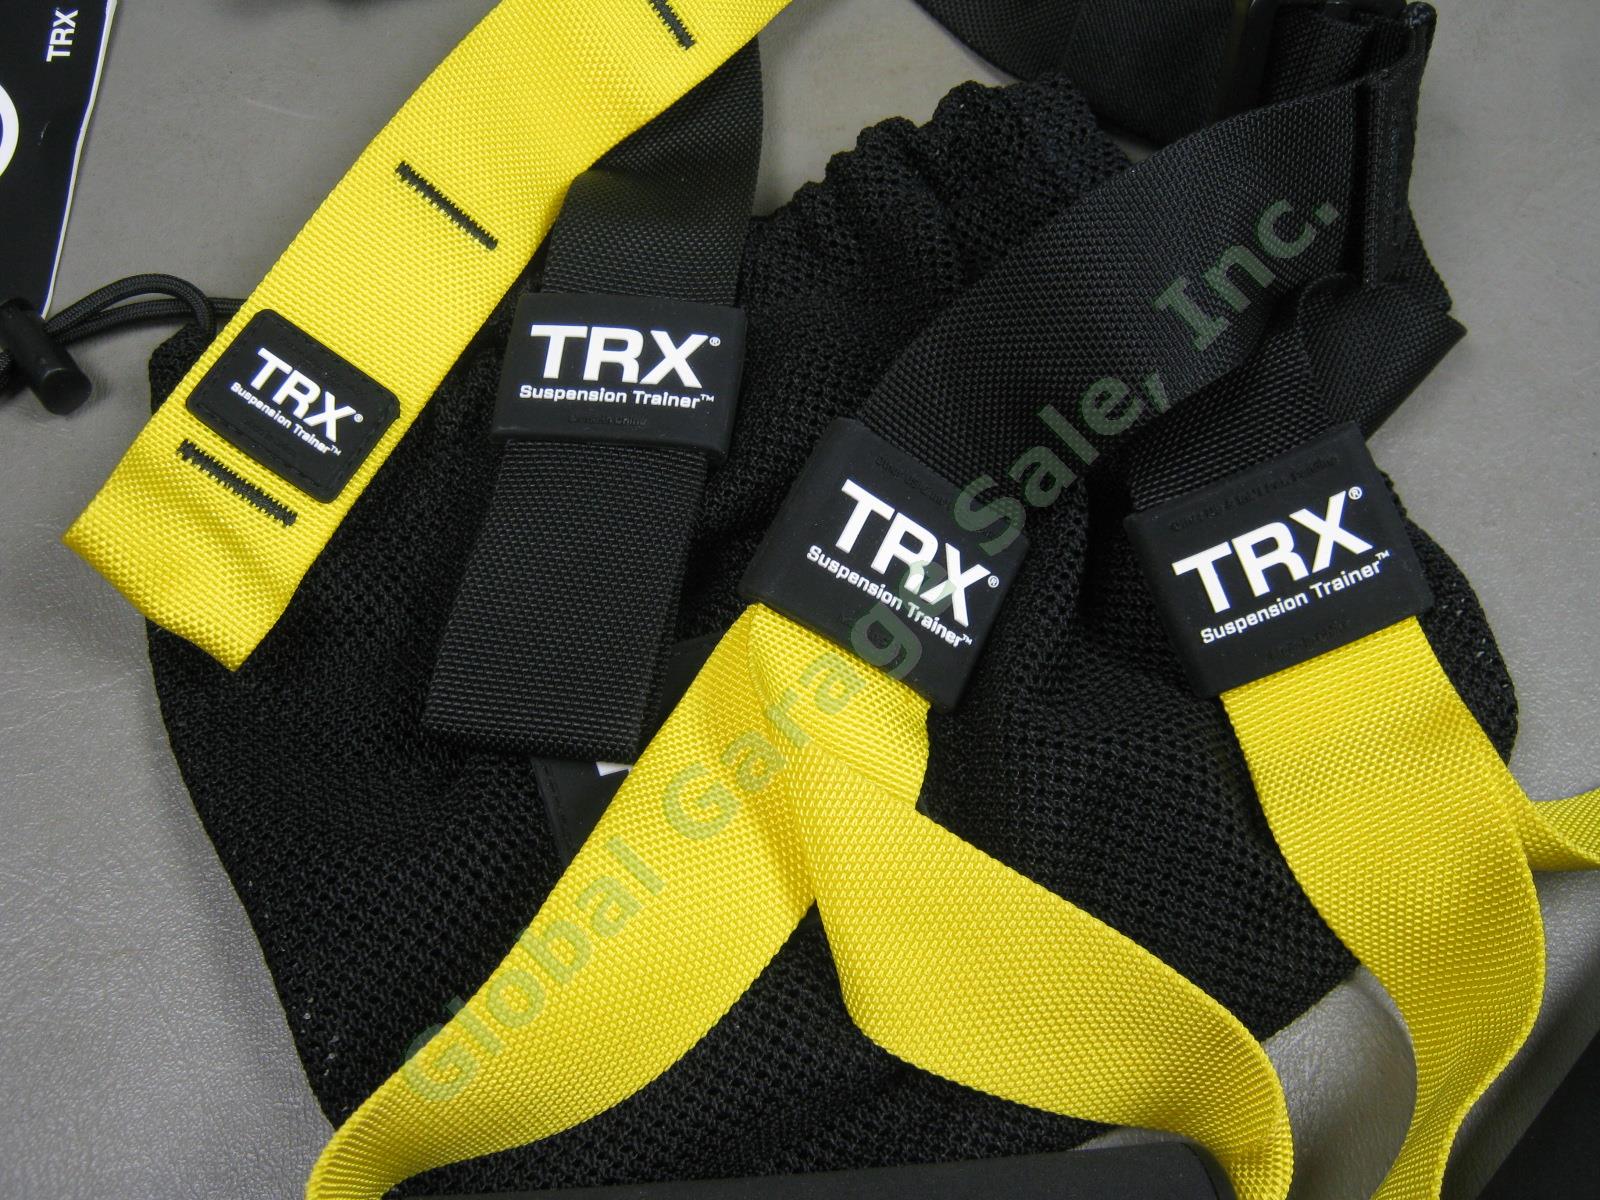 TRX Suspension Trainer Home Gym Fitness Training Strength Body Band Strap Kit NR 1